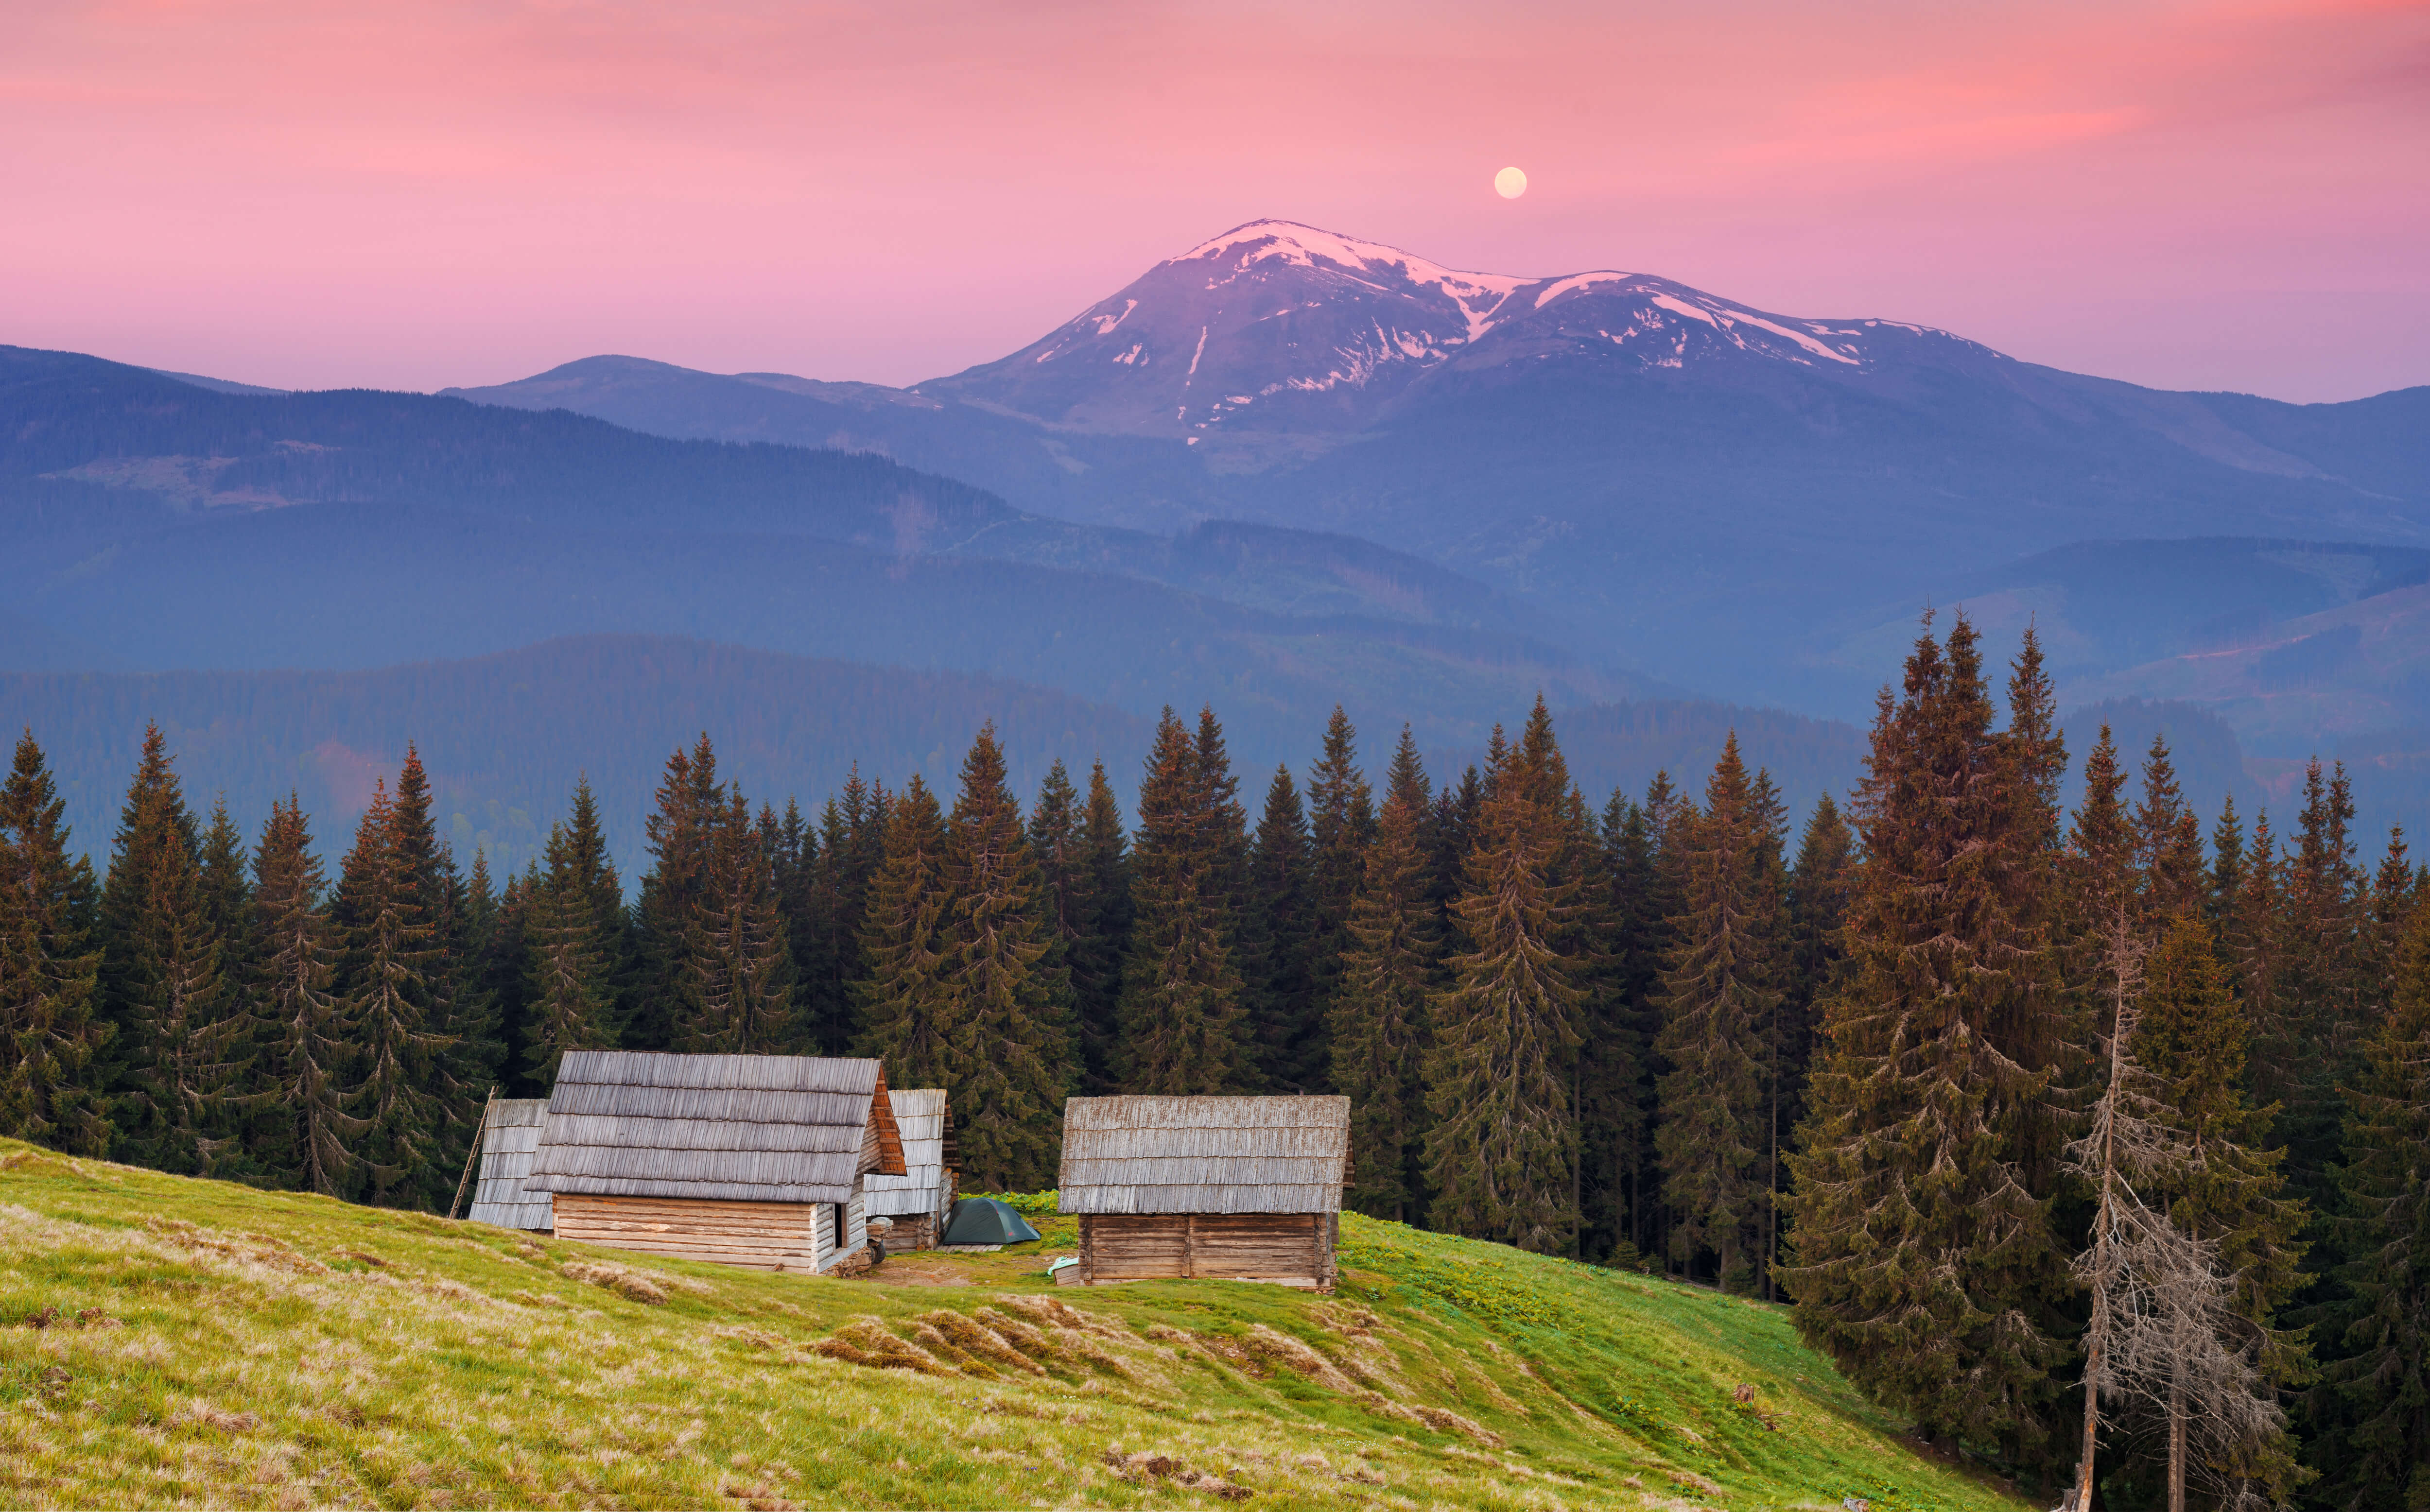 Pale sun in a pink morning lit sky behind two snow covered mountain tops. In the foreground, an idyllic wooden camping side on a green hill surrounded by pine forrest.